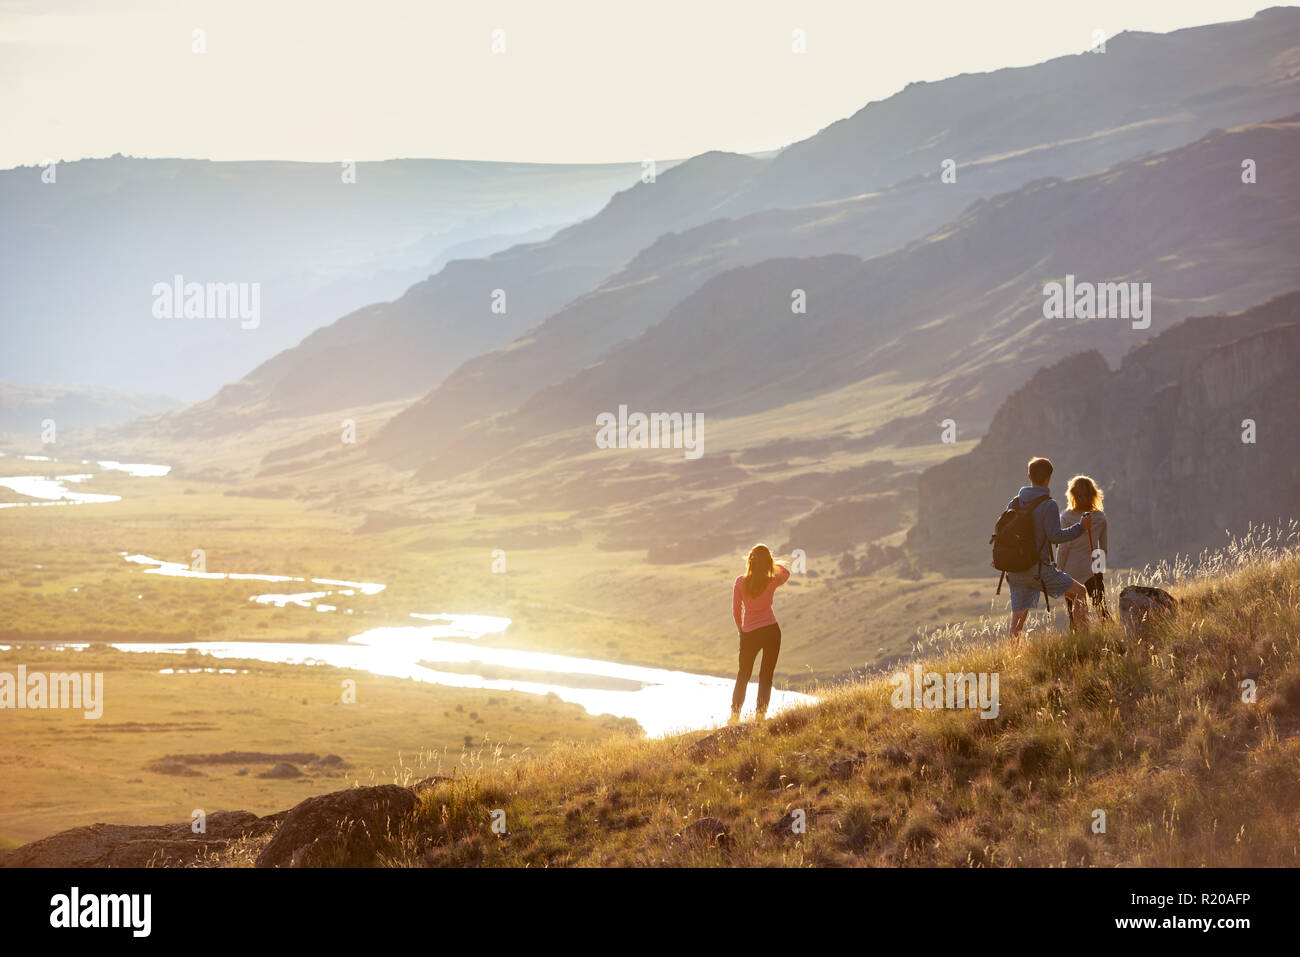 Group of tourists is having rest and looking at view in mountains area Stock Photo